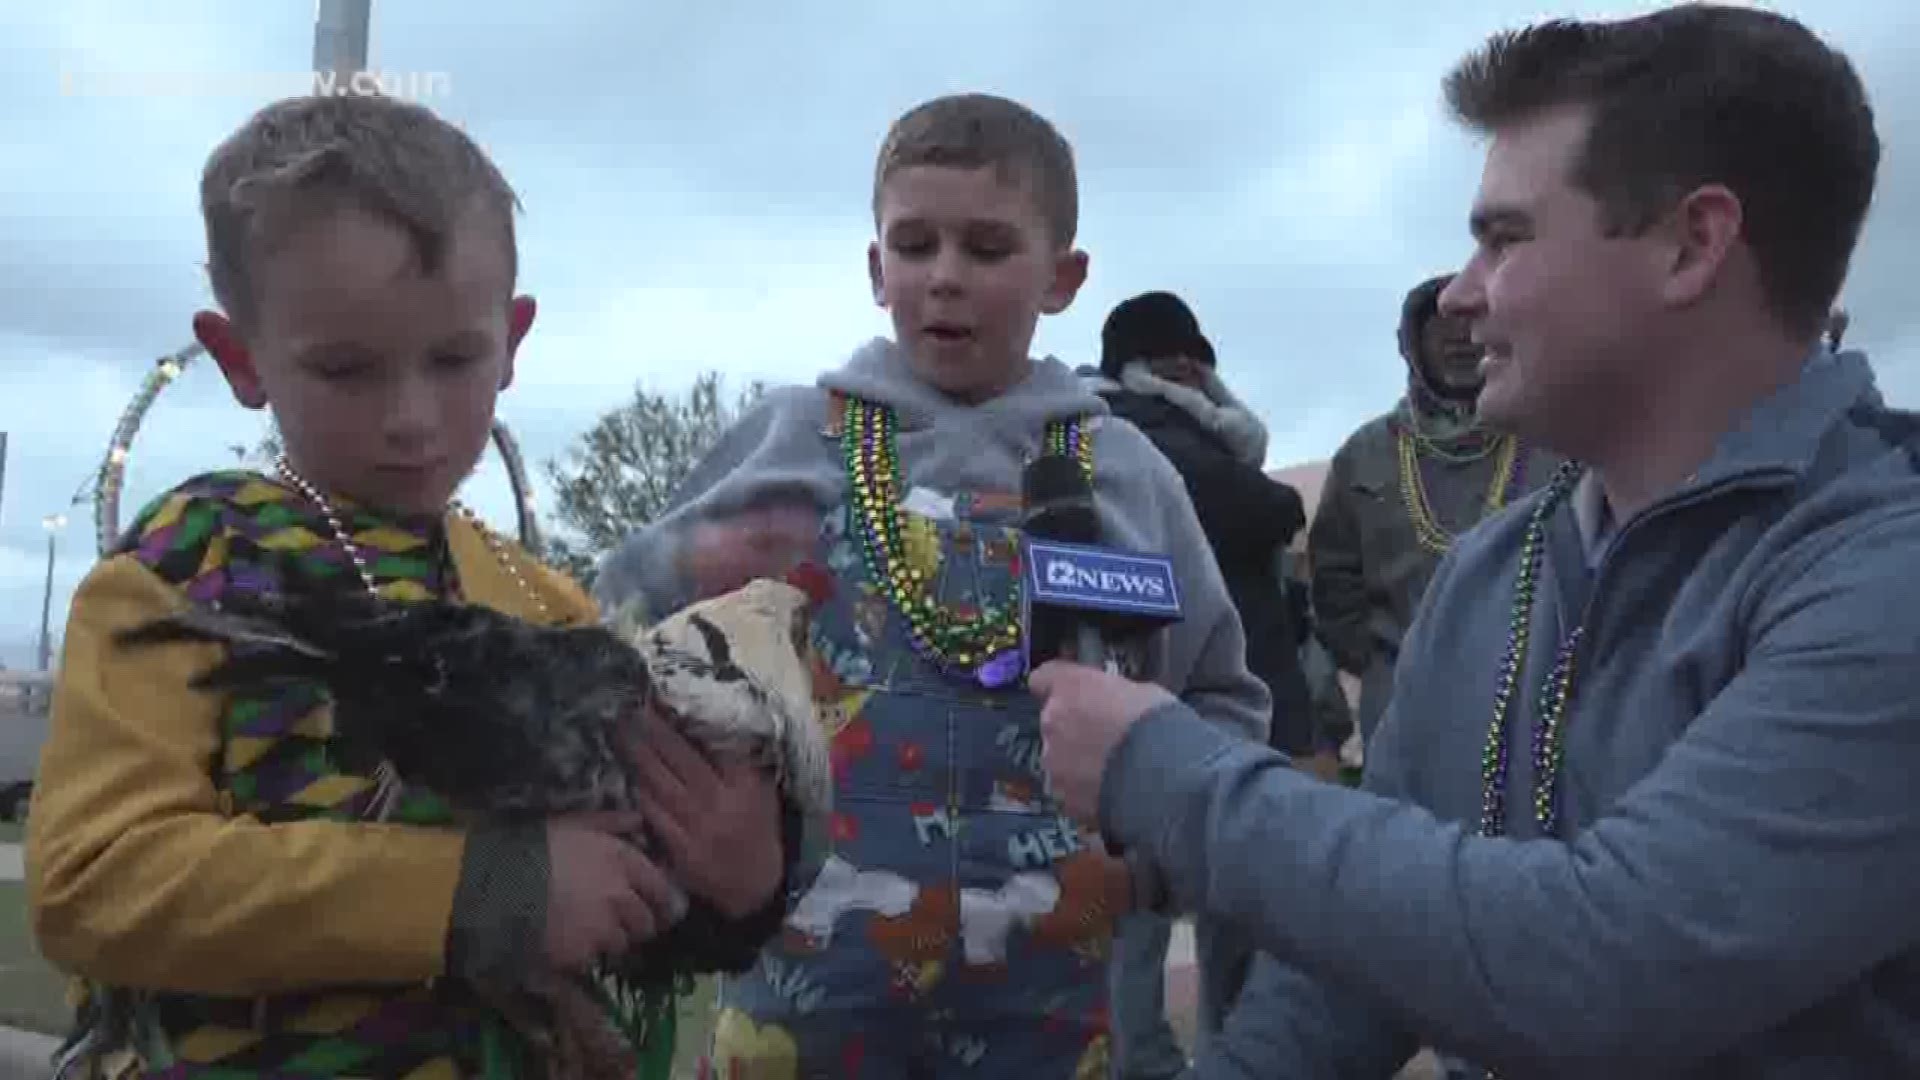 The chickens, Elma and Fred, weren't hurt in Thursday's festivities